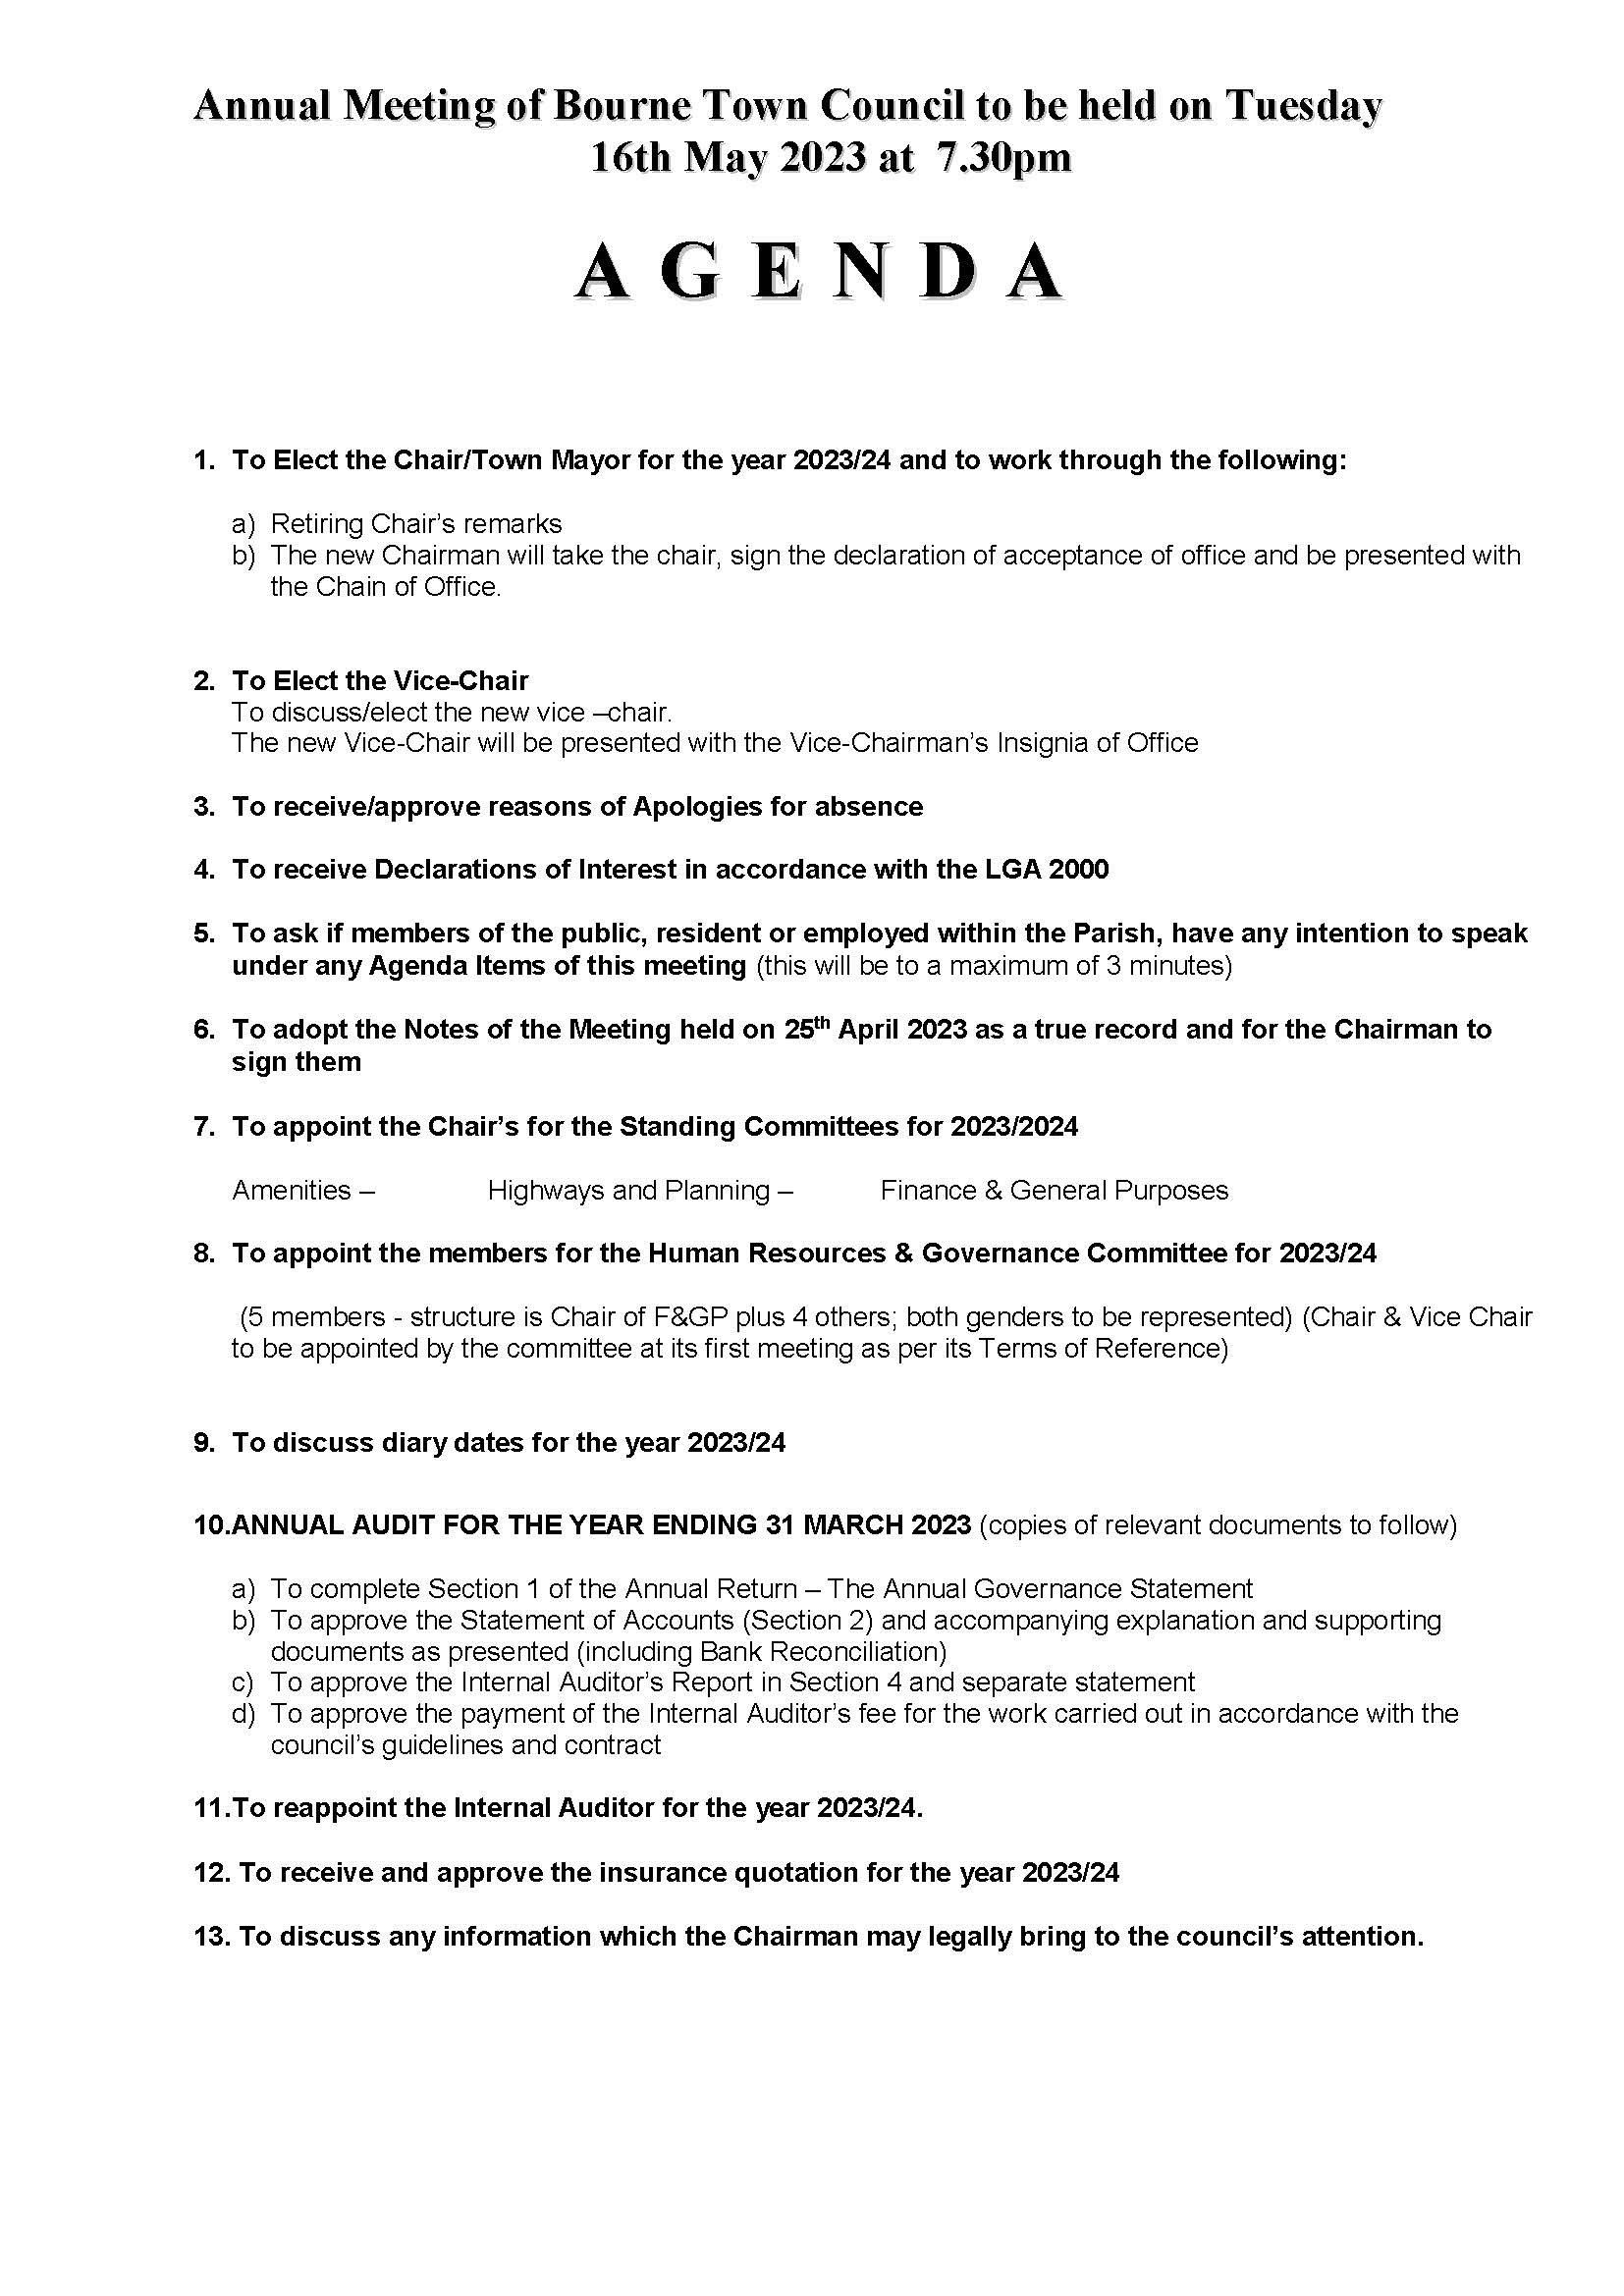 Agenda and Summons for Annual Meeting 2023